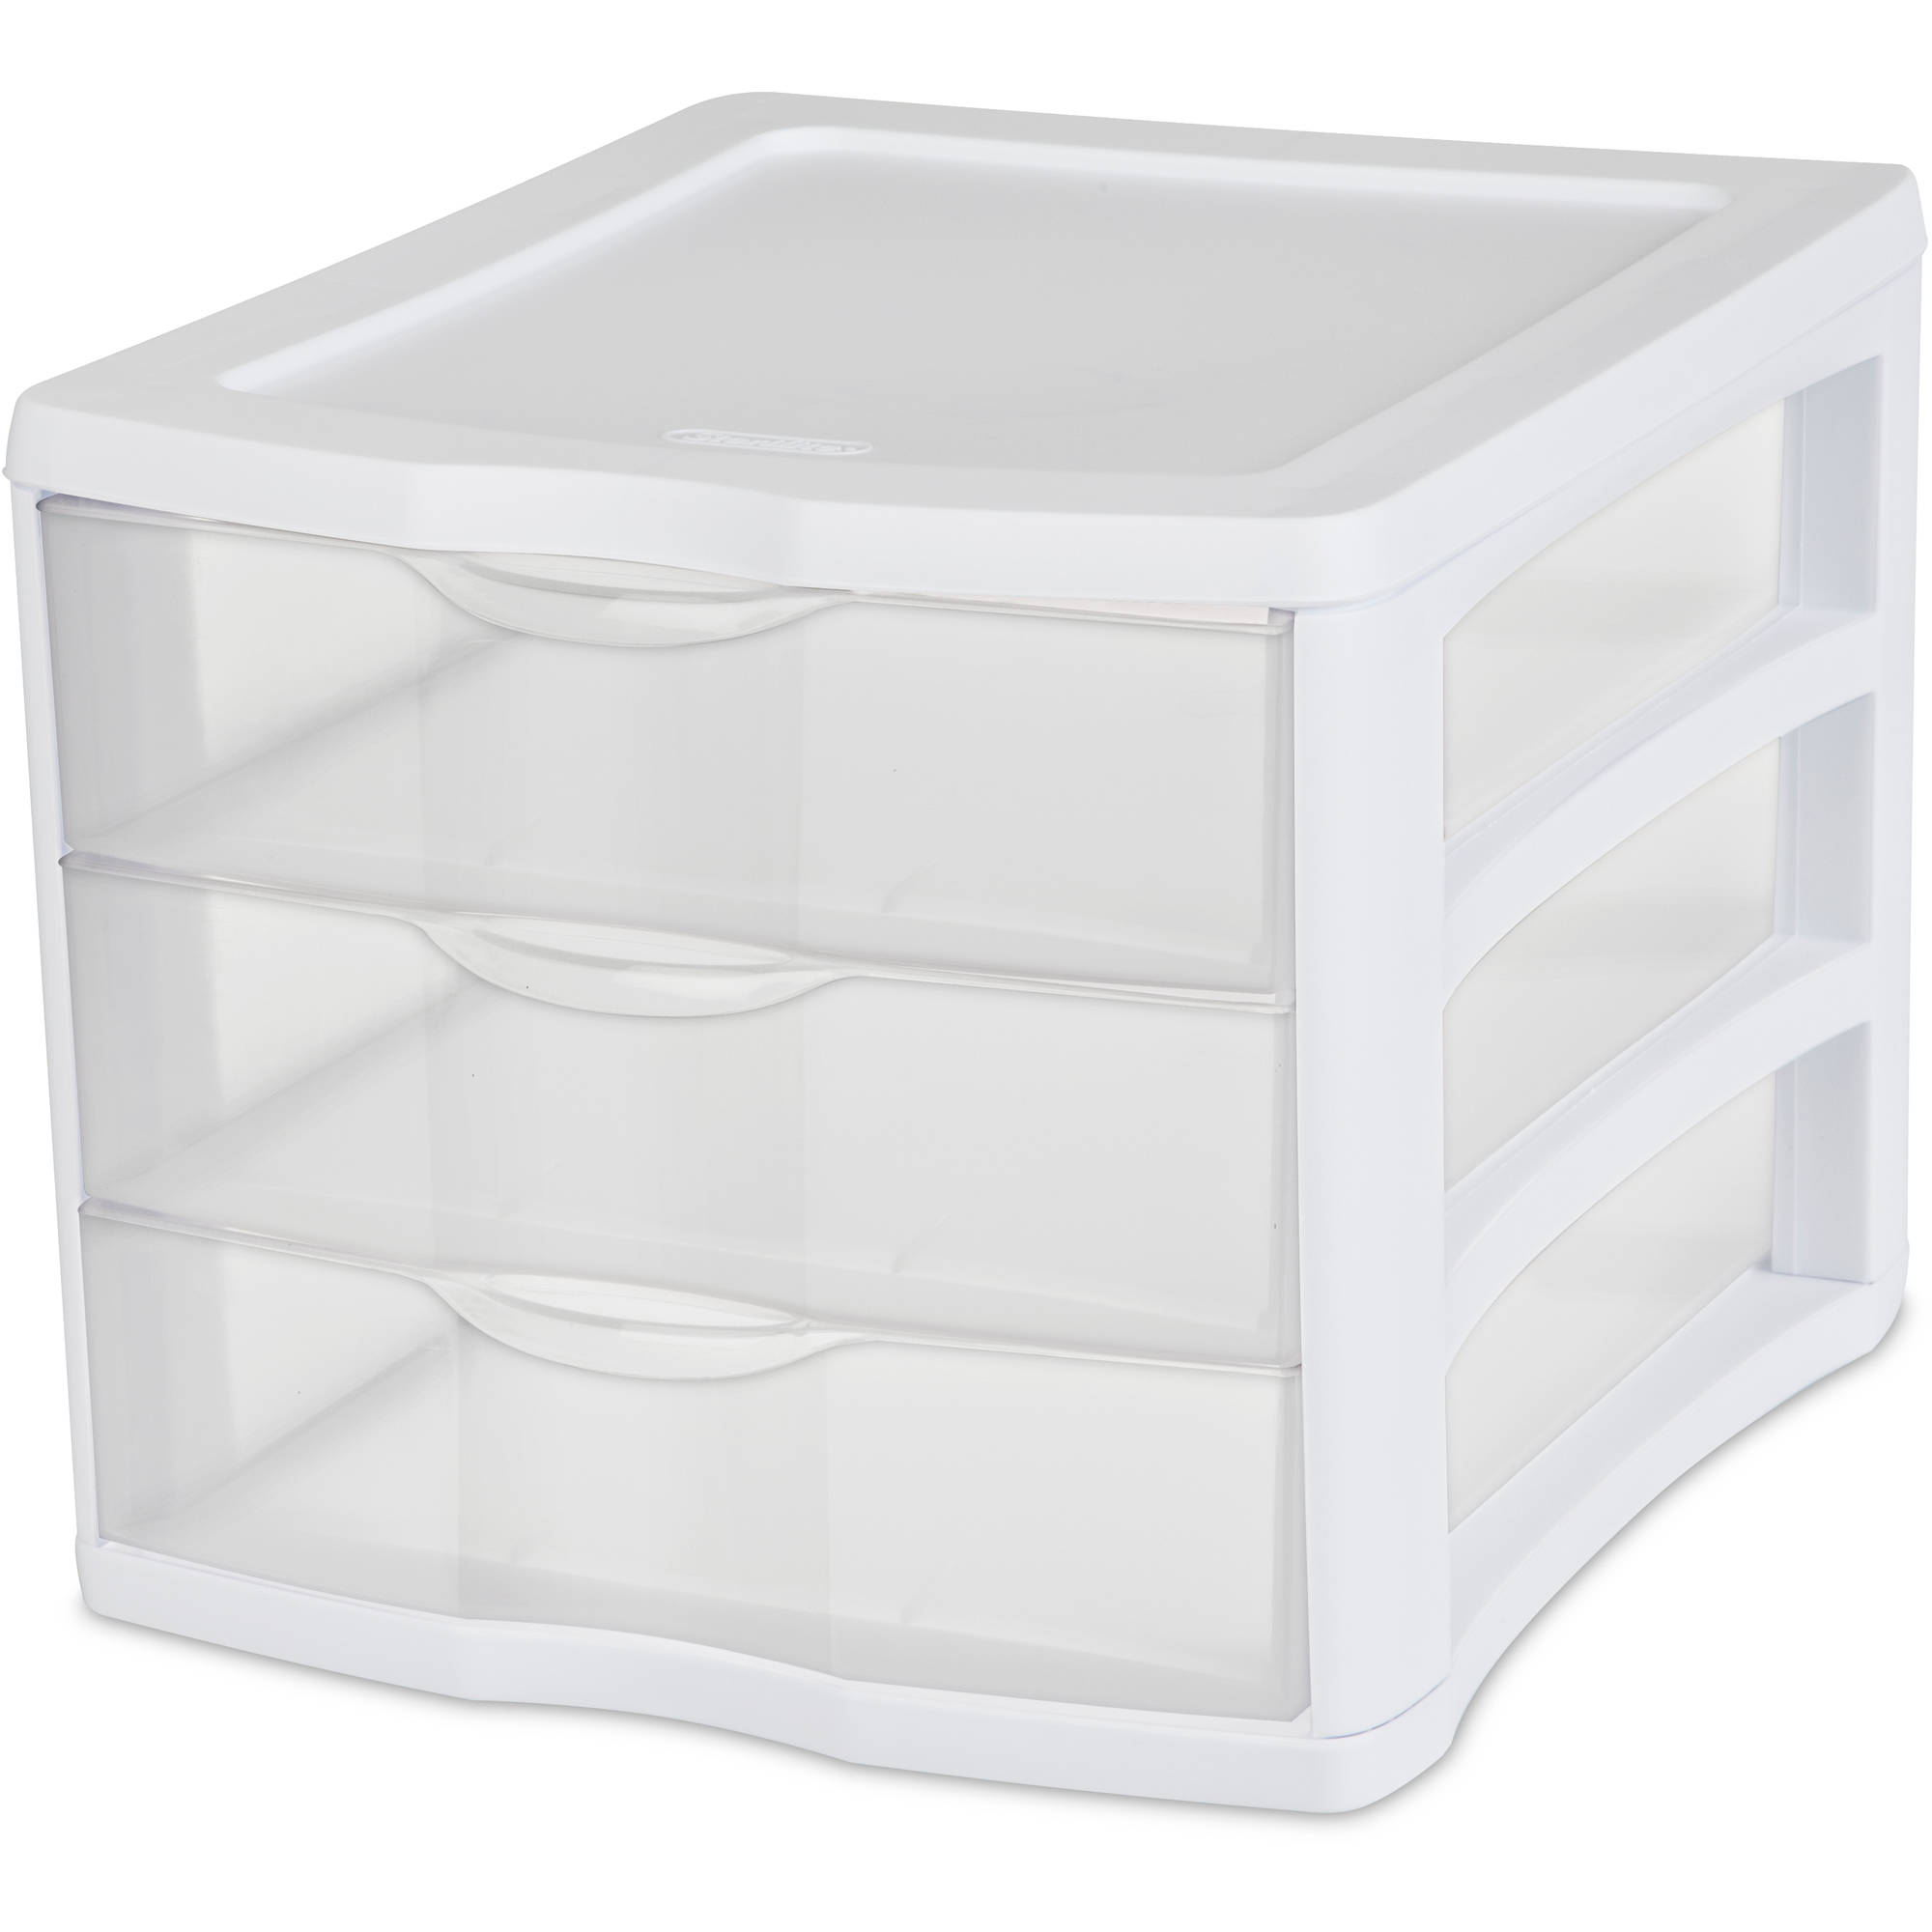 Plastic Storage Bins With Drawers On Wheels Storage Ideas intended for size 2000 X 2000